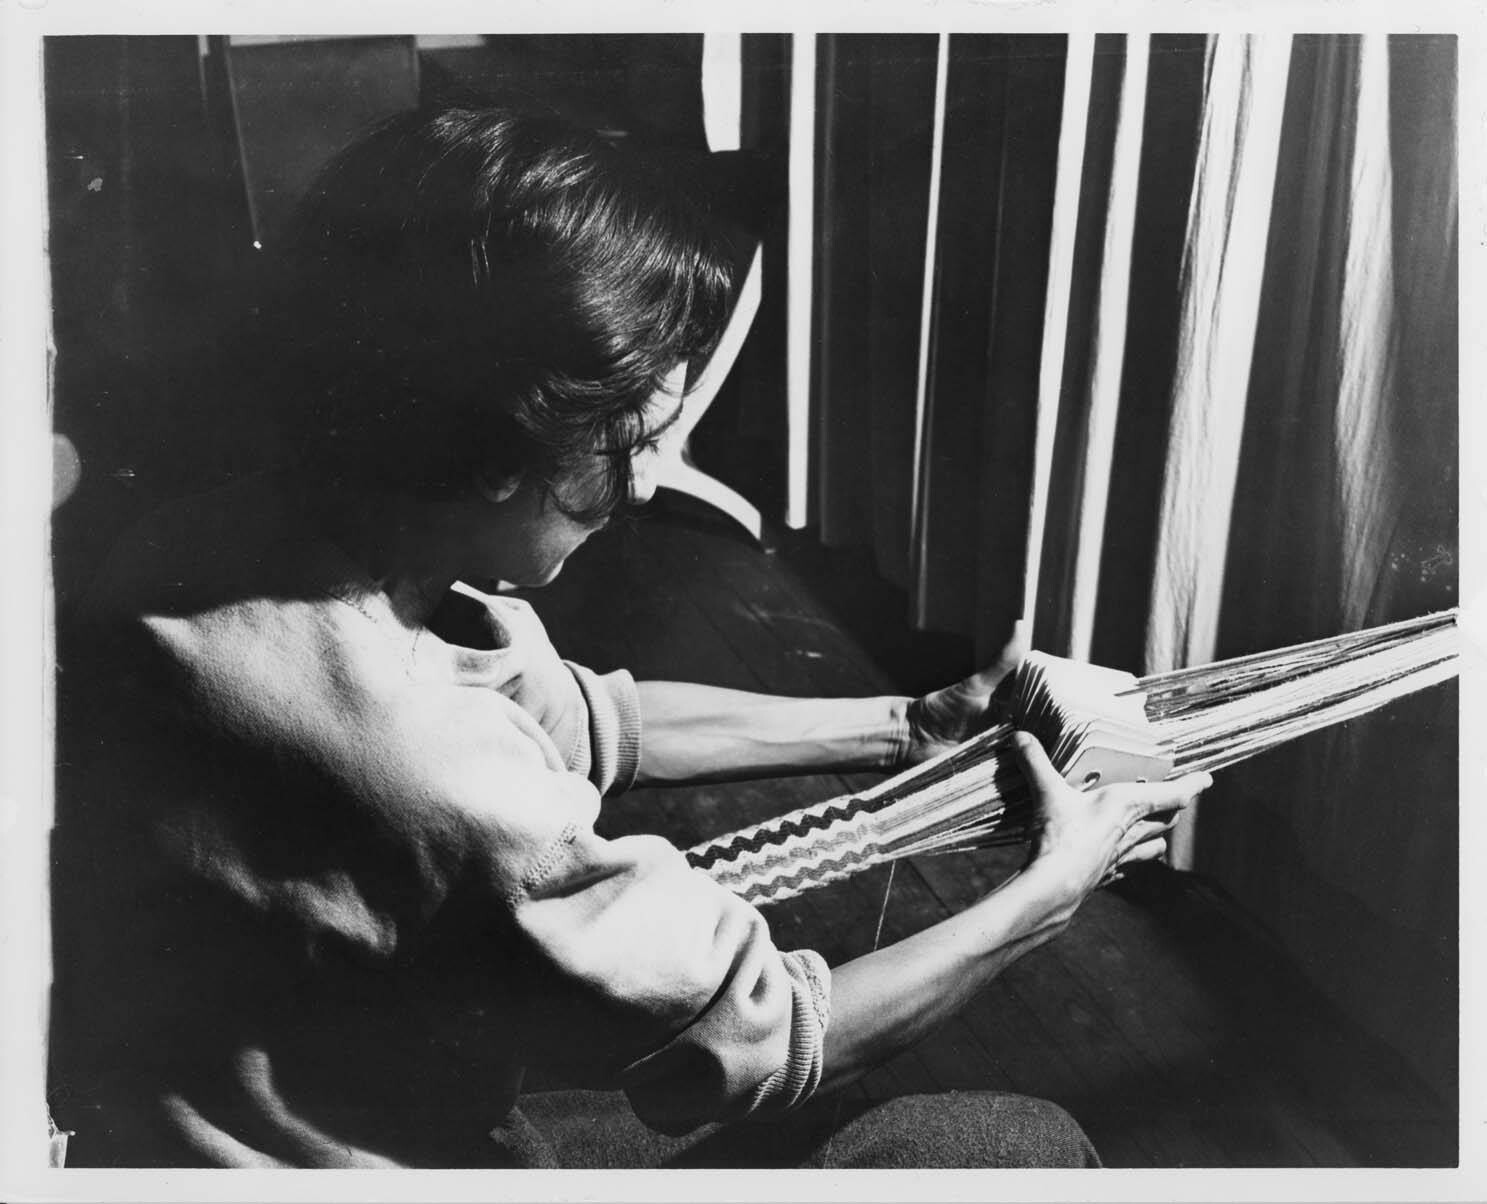 A photo of Anni Albers card weaving at Black Mountain College.